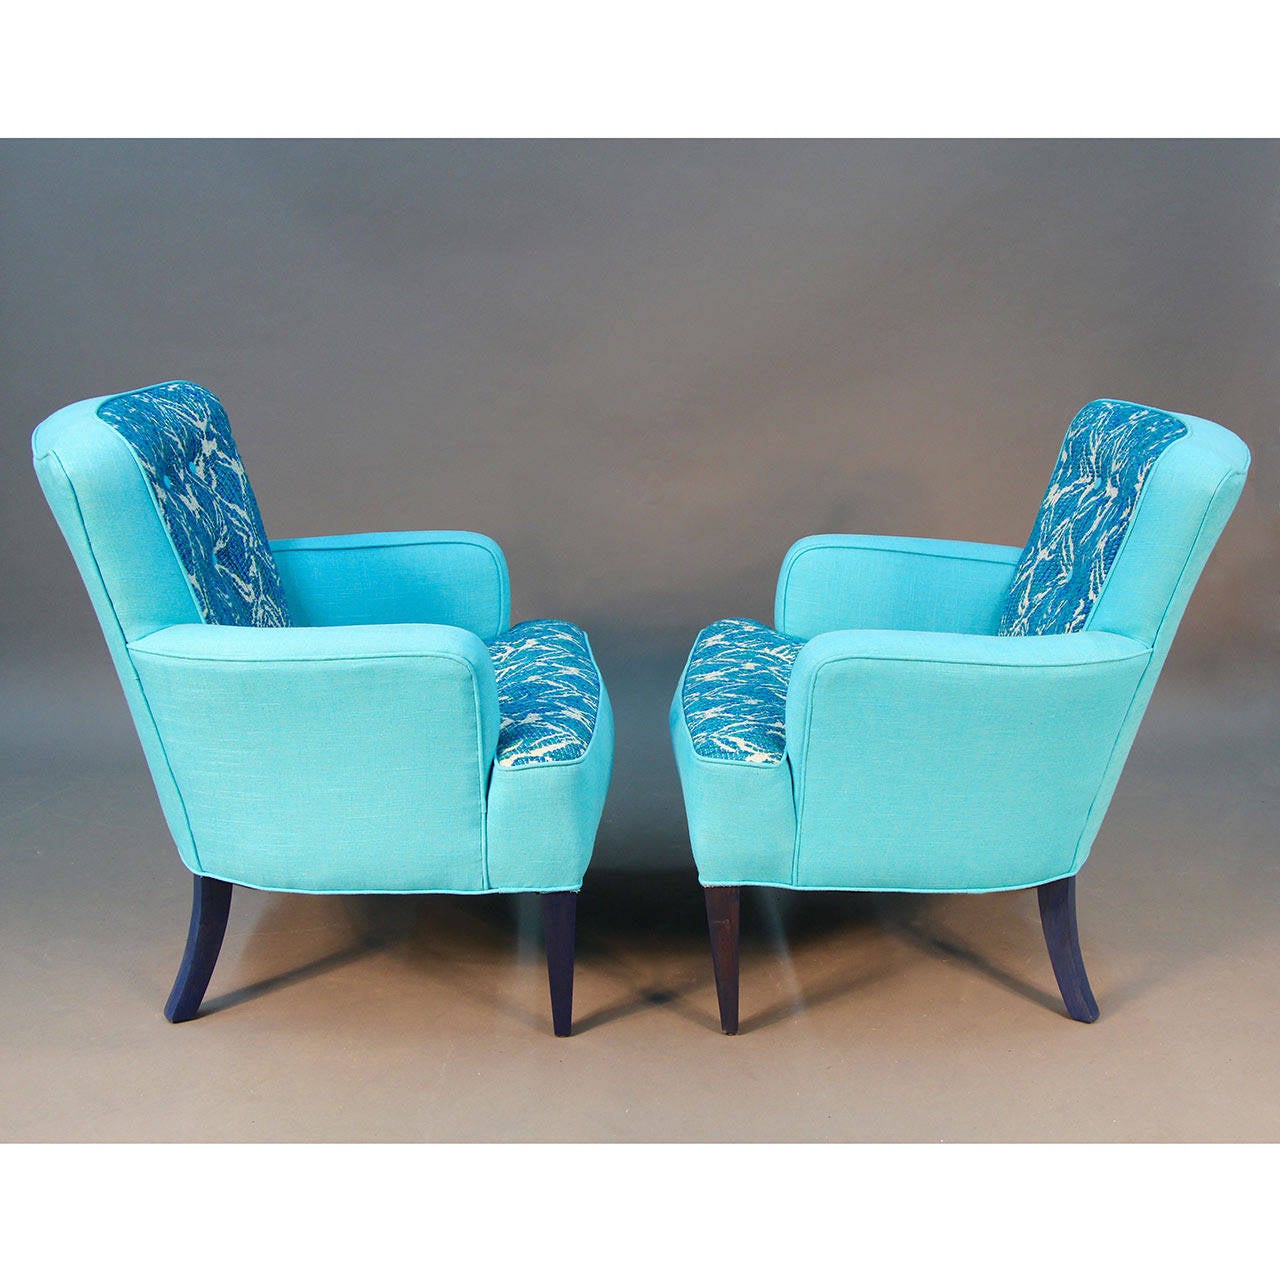 Mid-20th Century Pair of Turquoise Sala Chairs Draper Era For Sale